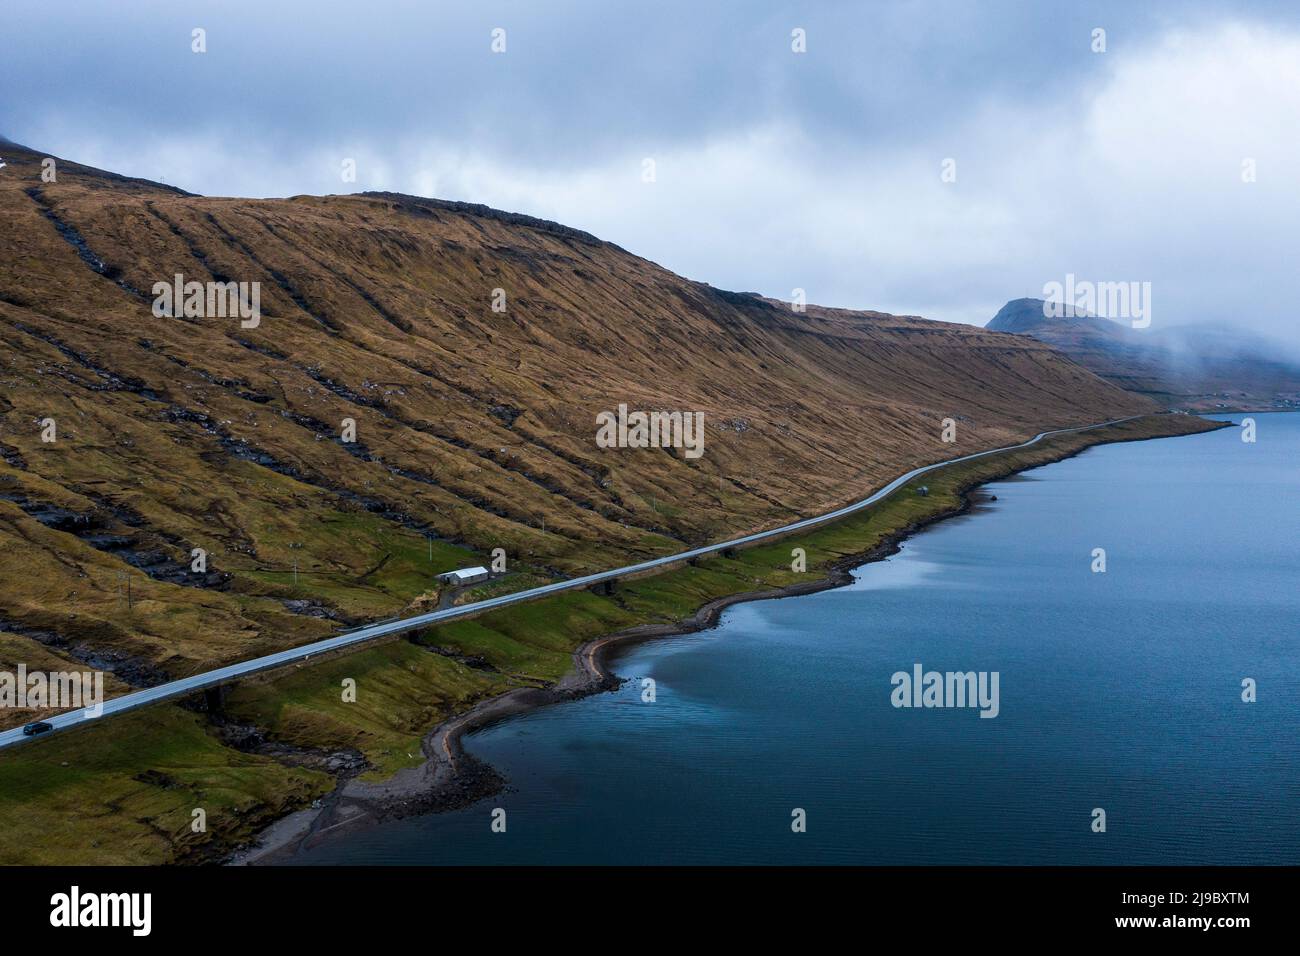 A virtually empty road in the Faroe Islands surrounded only by grassy mountains and the sea. Stock Photo